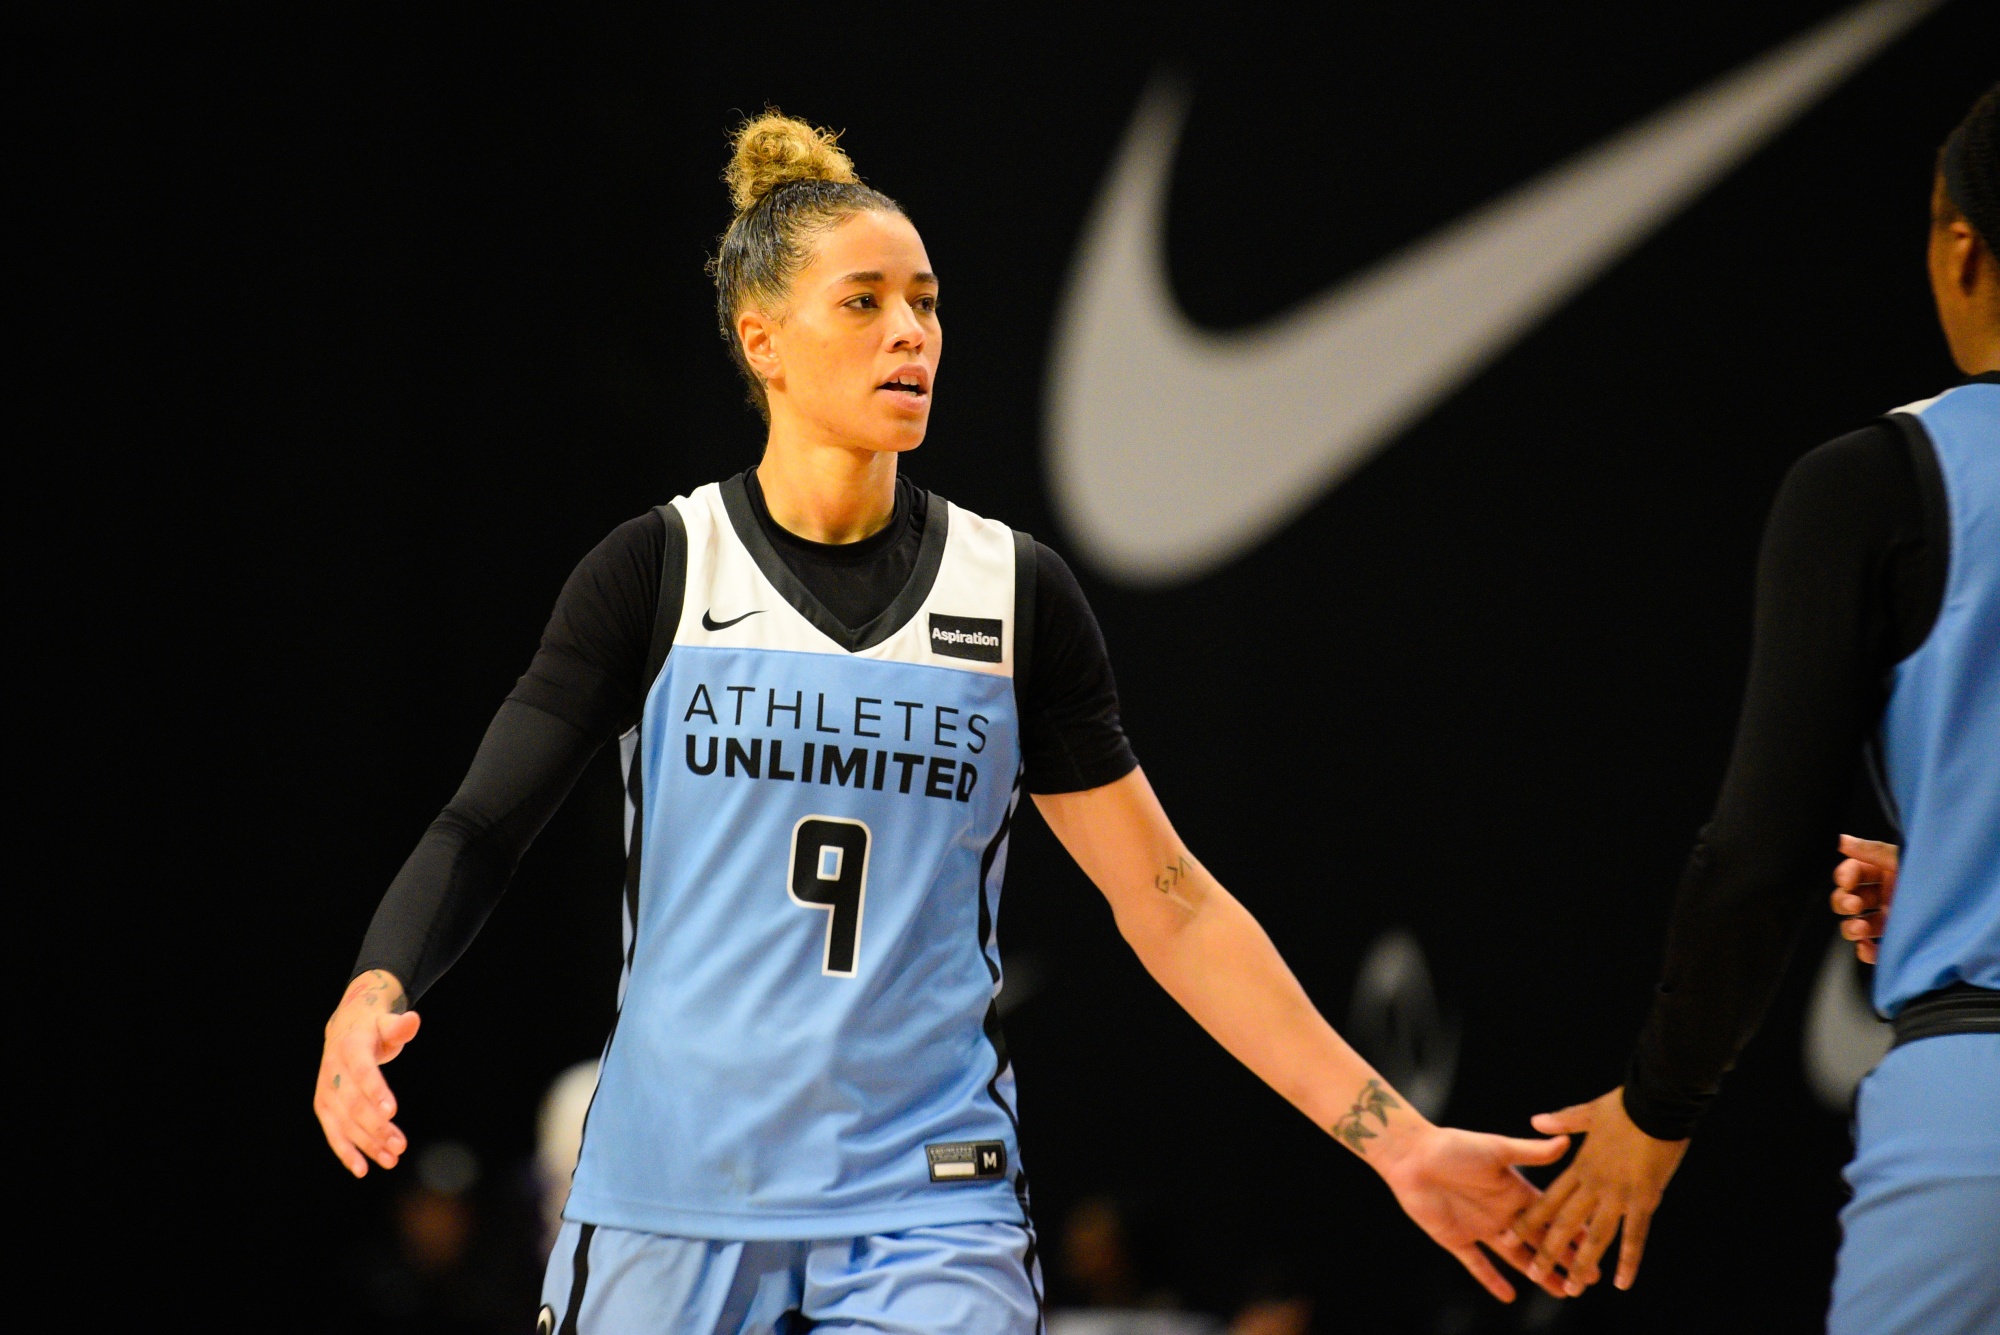 WNBA players gear up for a second Athletes Unlimited basketball